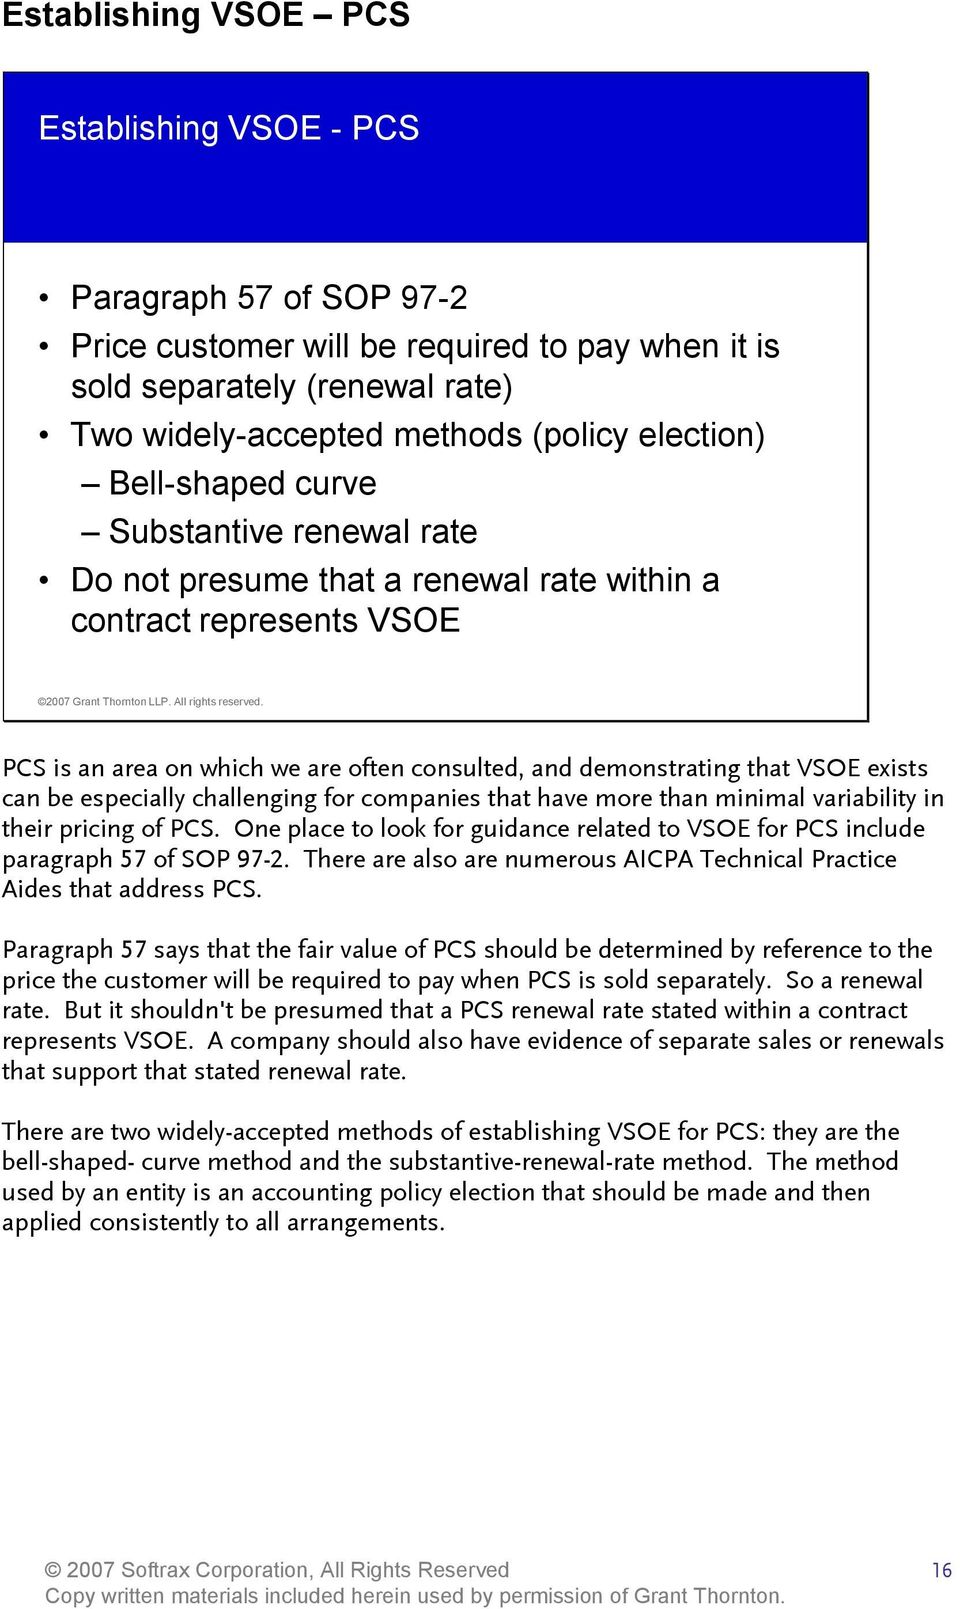 be especially challenging for companies that have more than minimal variability in their pricing of PCS. One place to look for guidance related to VSOE for PCS include paragraph 57 of SOP 97-2.